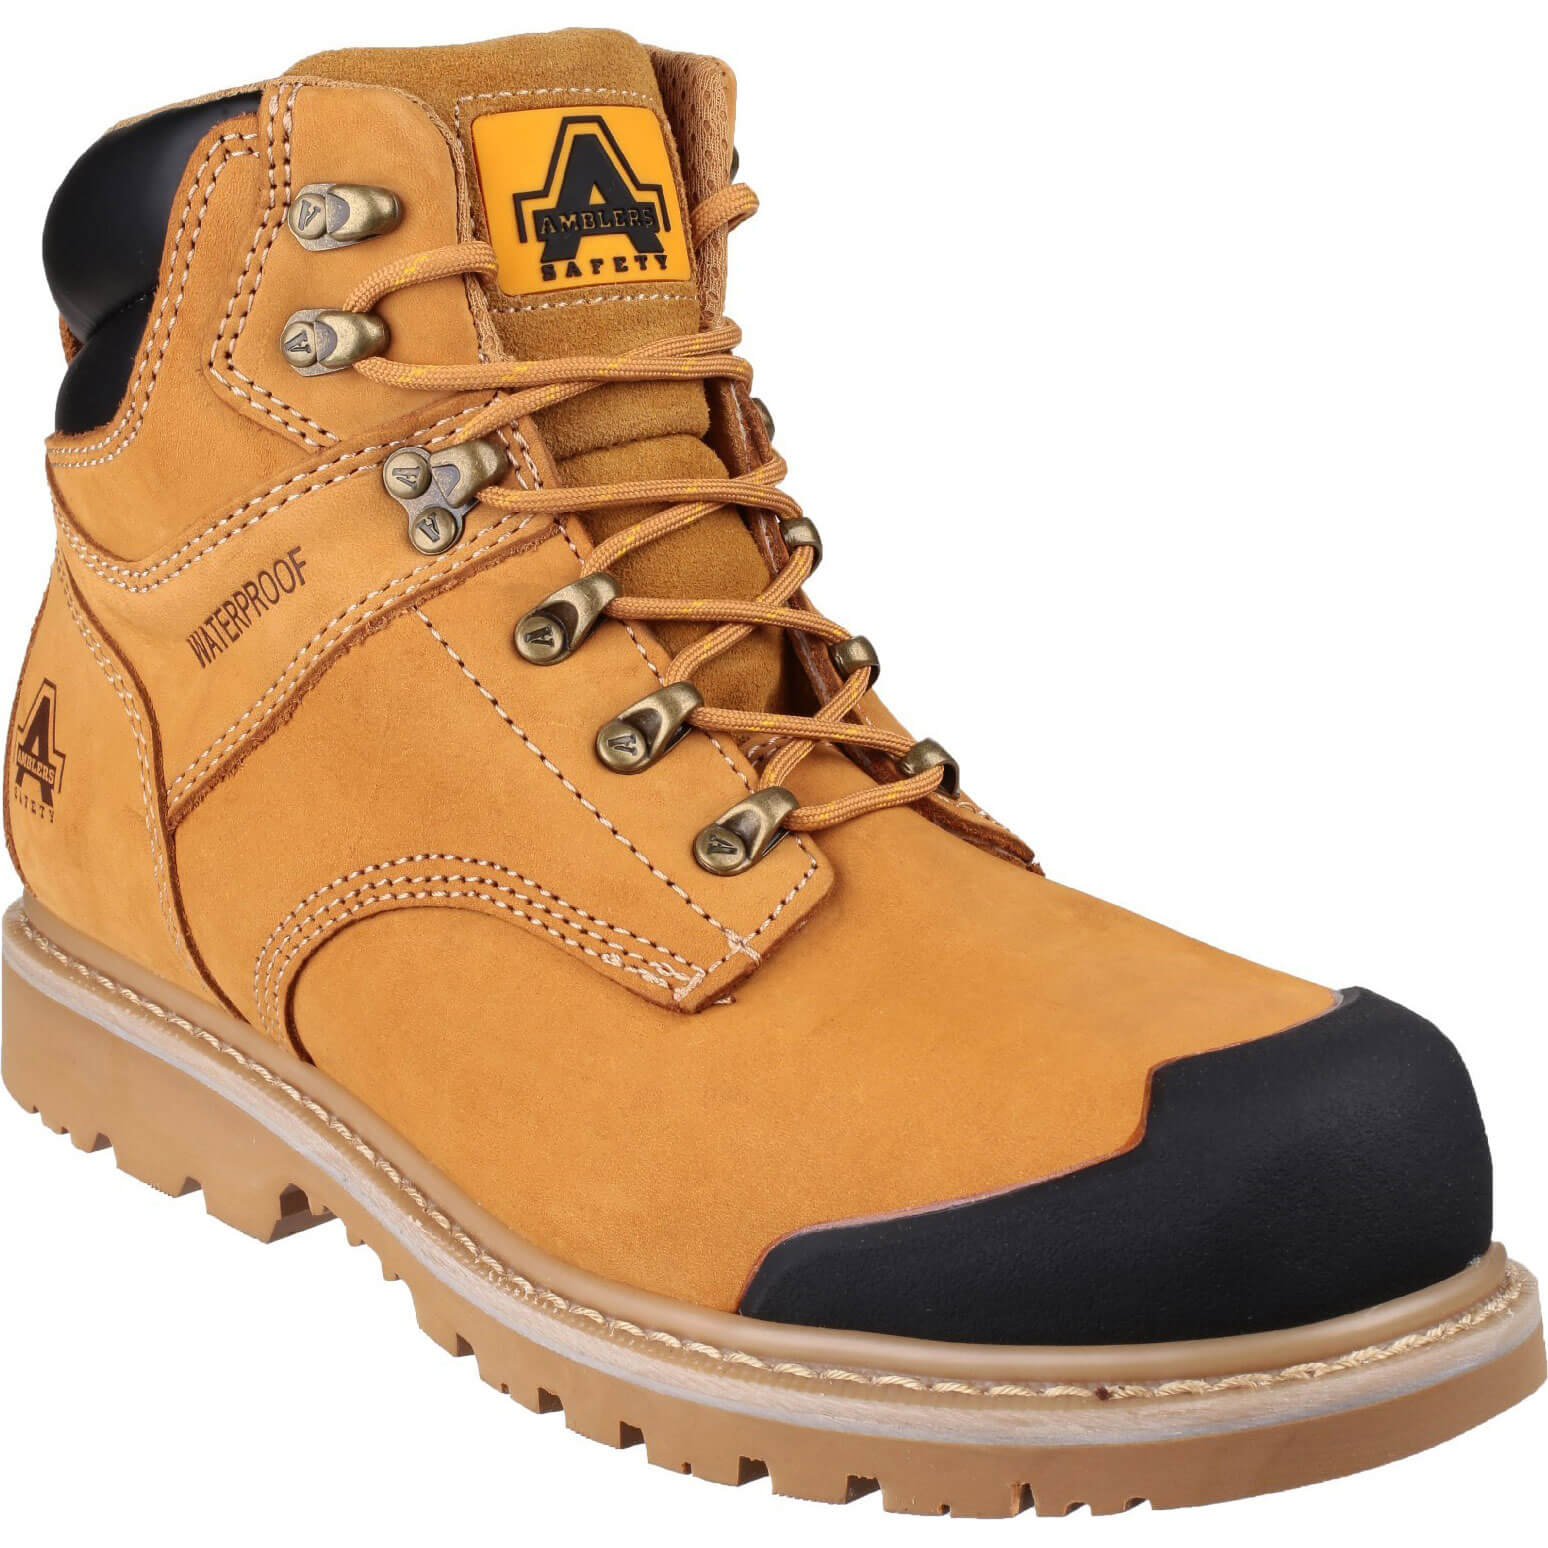 Photo of Amblers Mens Safety Fs226 Goodyear Welted Waterproof Industrial Safety Boots Honey Size 9